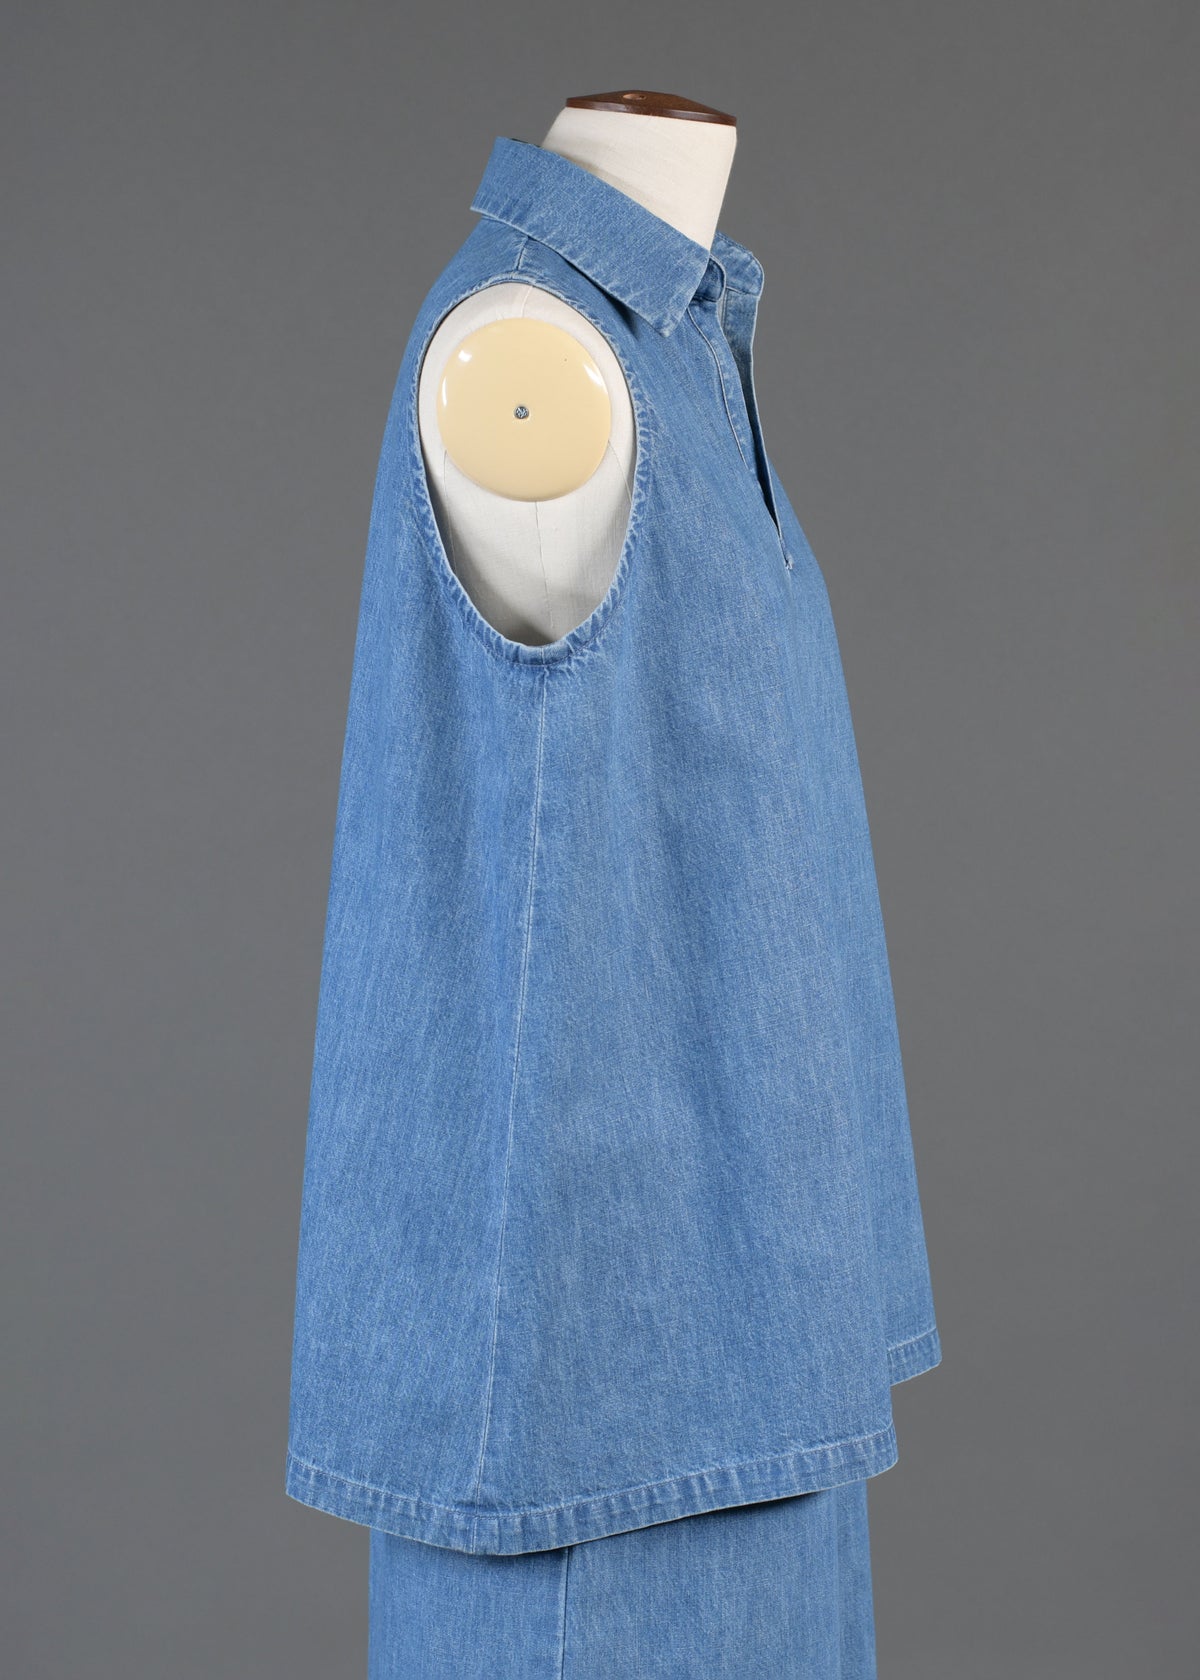 denim A-line shell with collar and front placket opening - mid plus